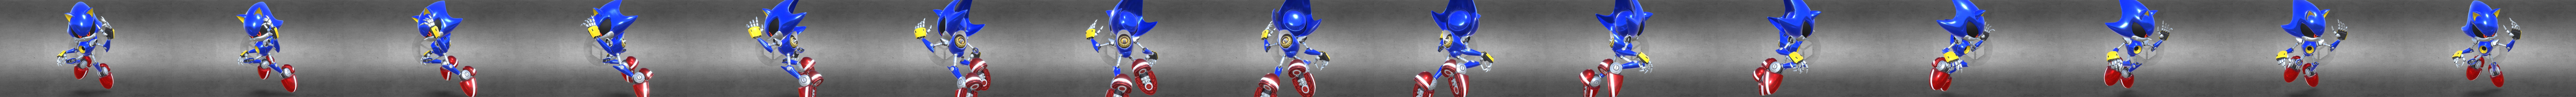 JoeTE's Game Mods, After making that previous Metal Sonic 3.0 render